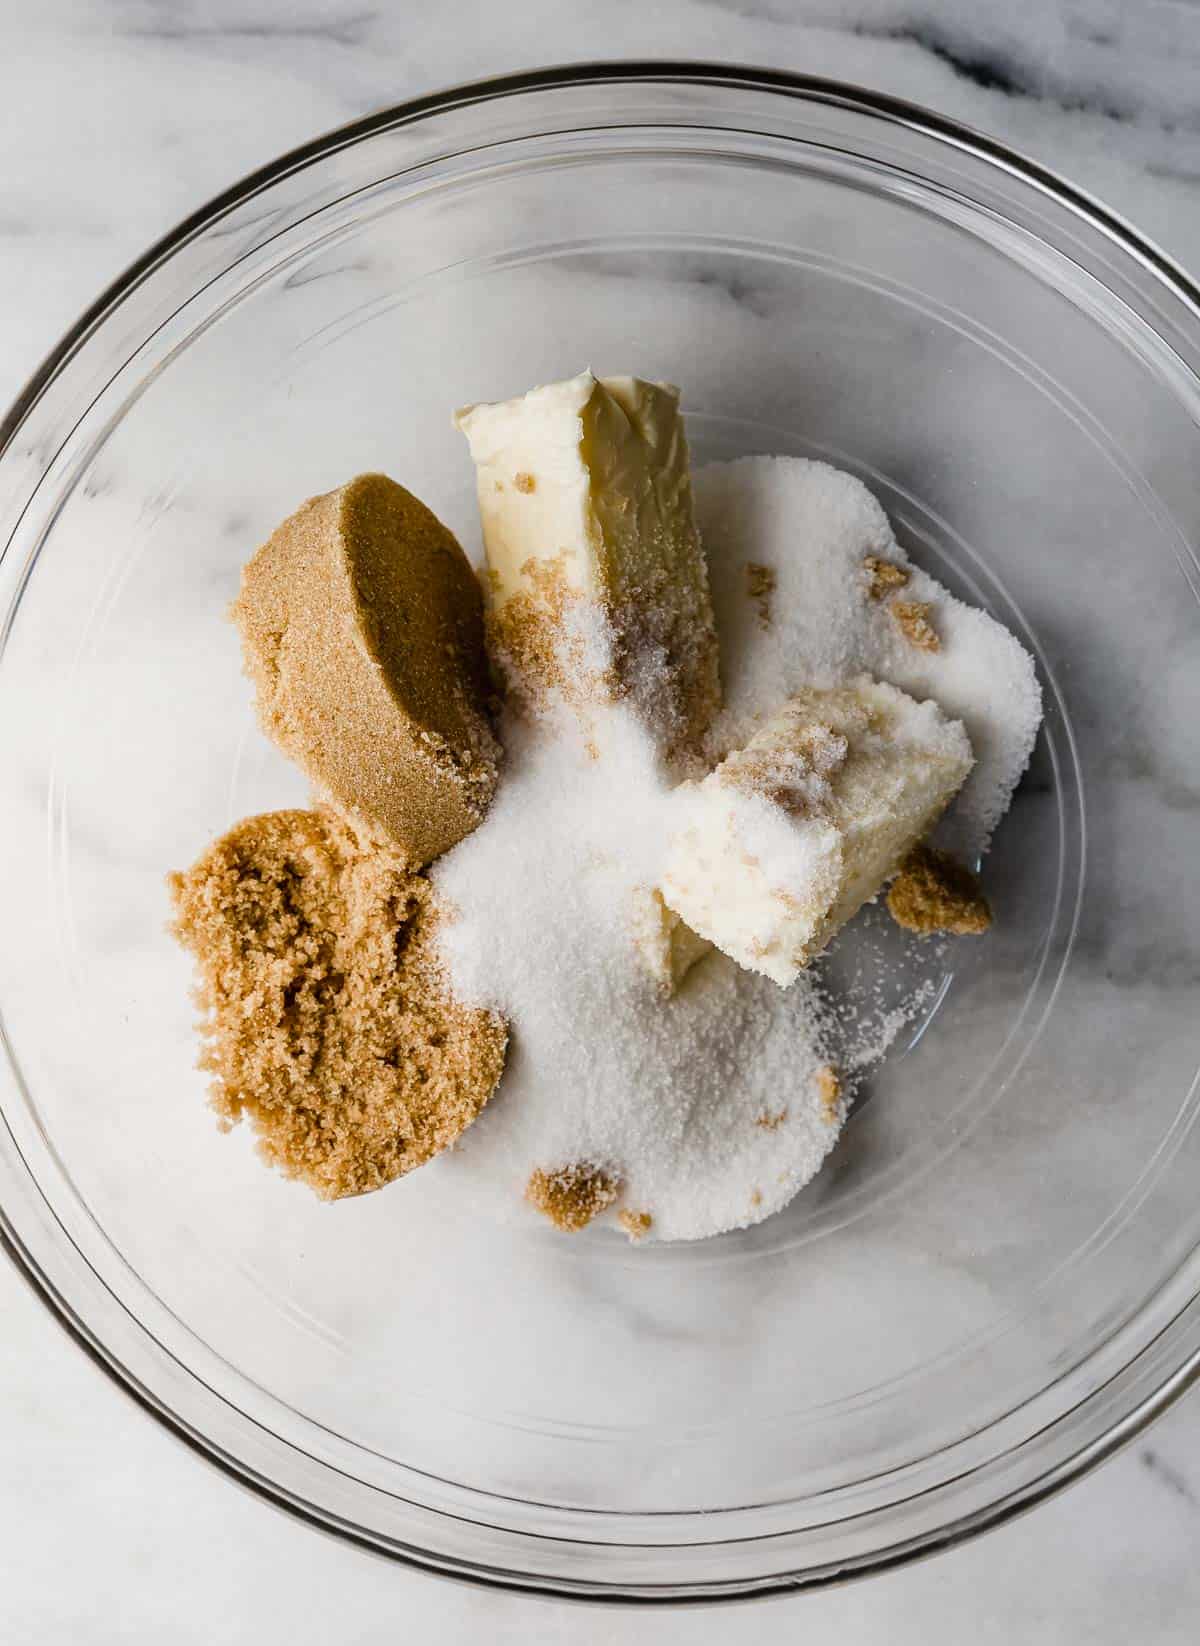 Butter, sugar, and brown sugar in a glass bowl on a marble background.